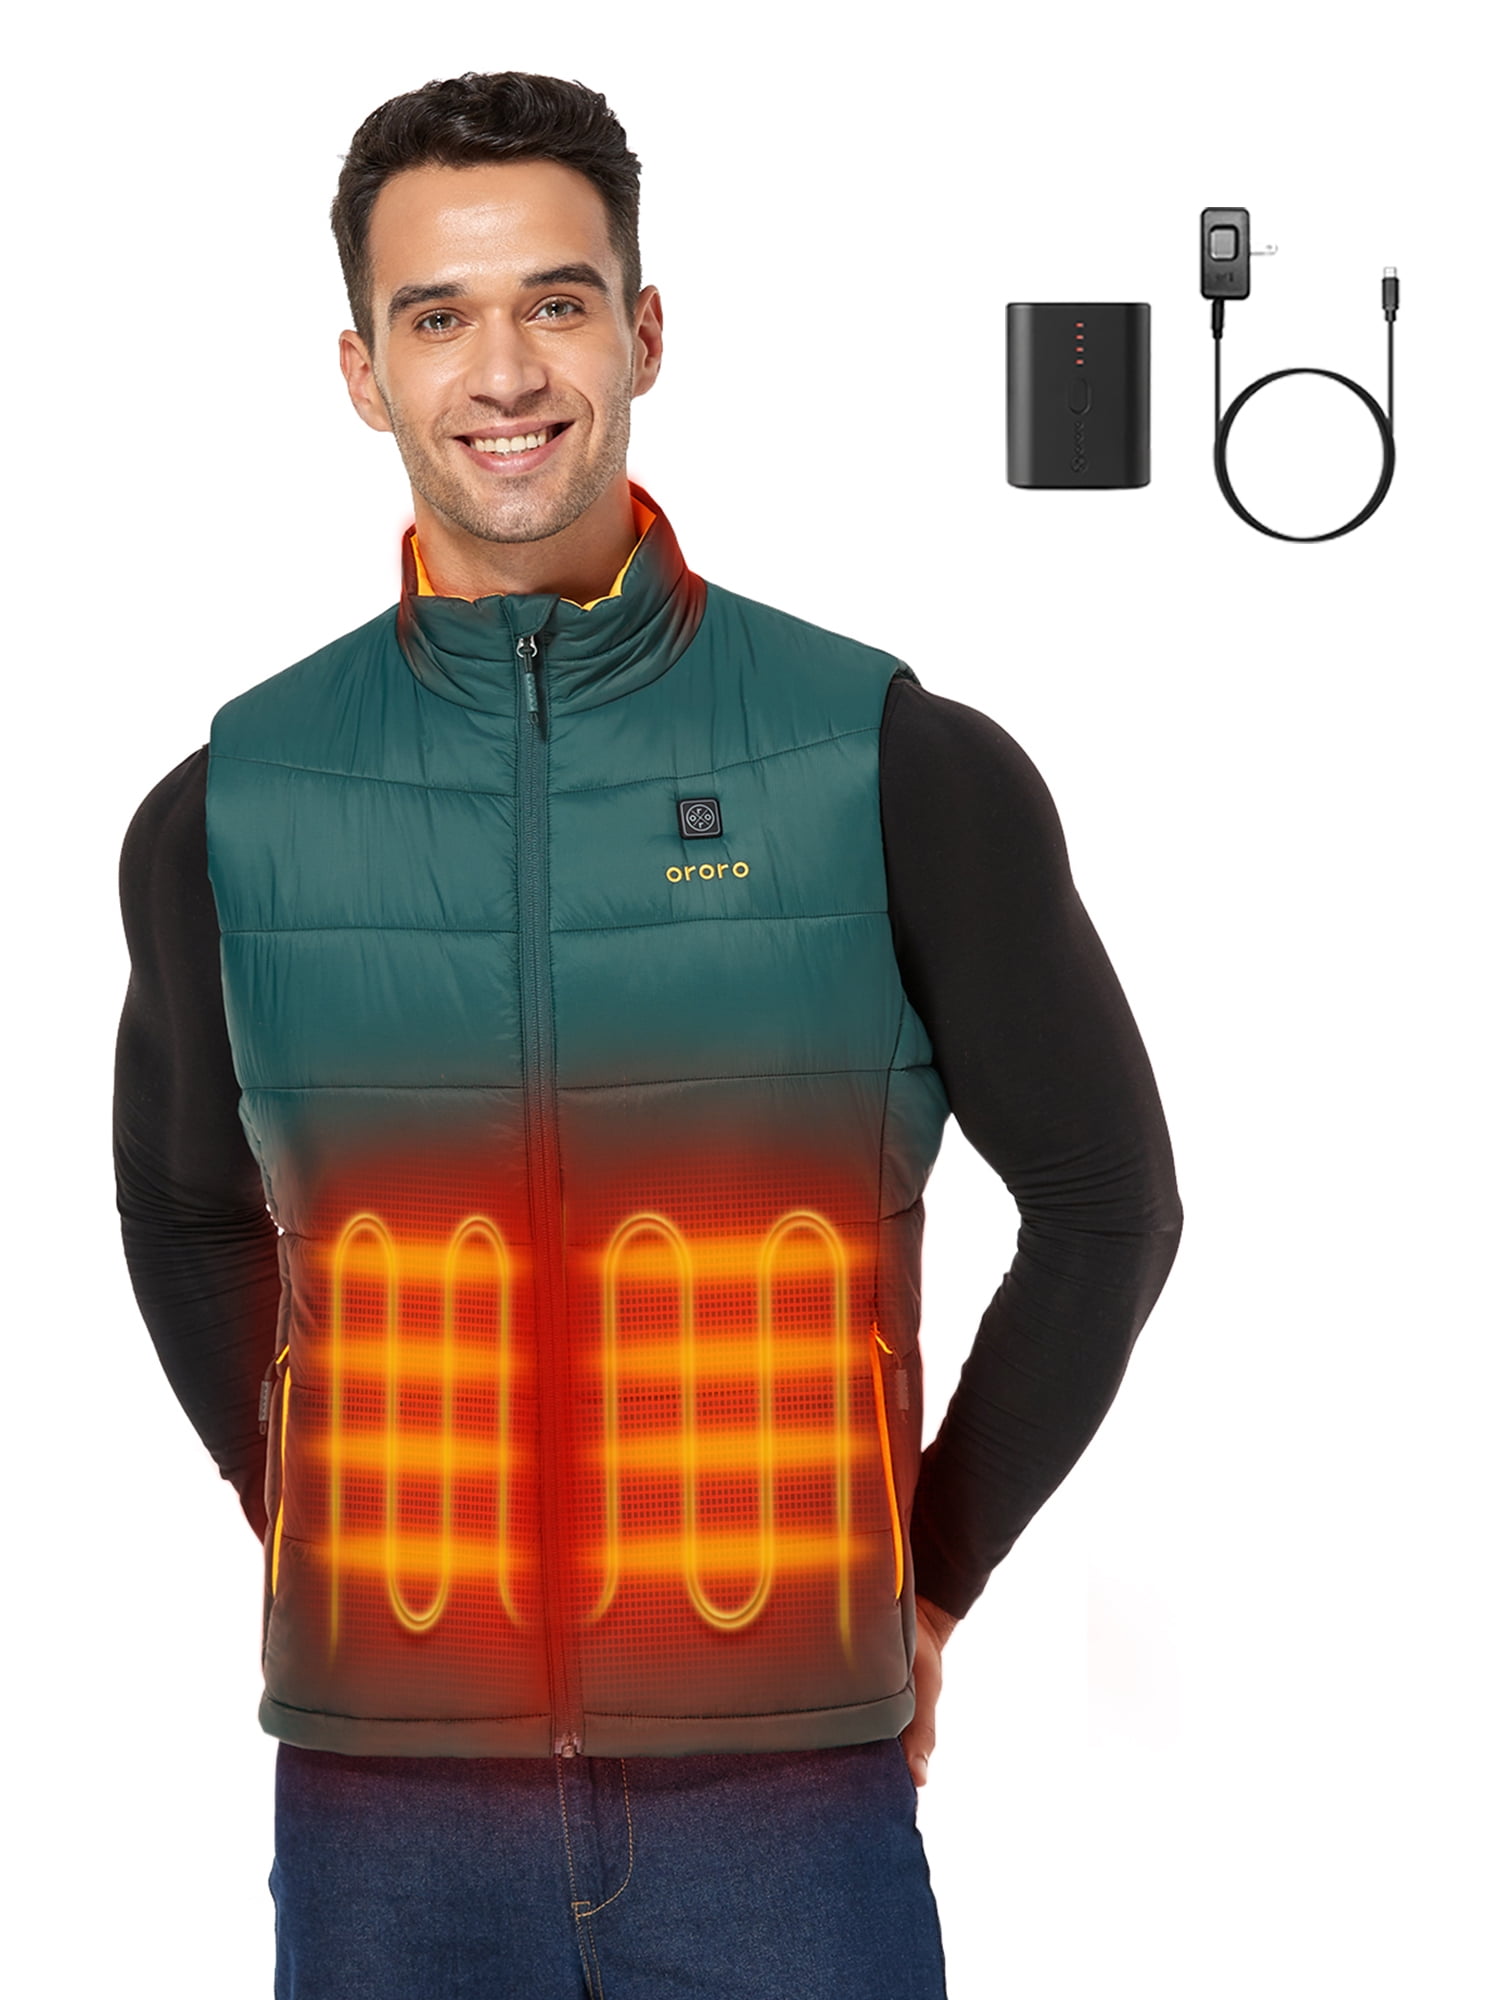 ORORO Men's Heated Vest with Upgraded Battery Pack (Green/Yellow,2XL ...